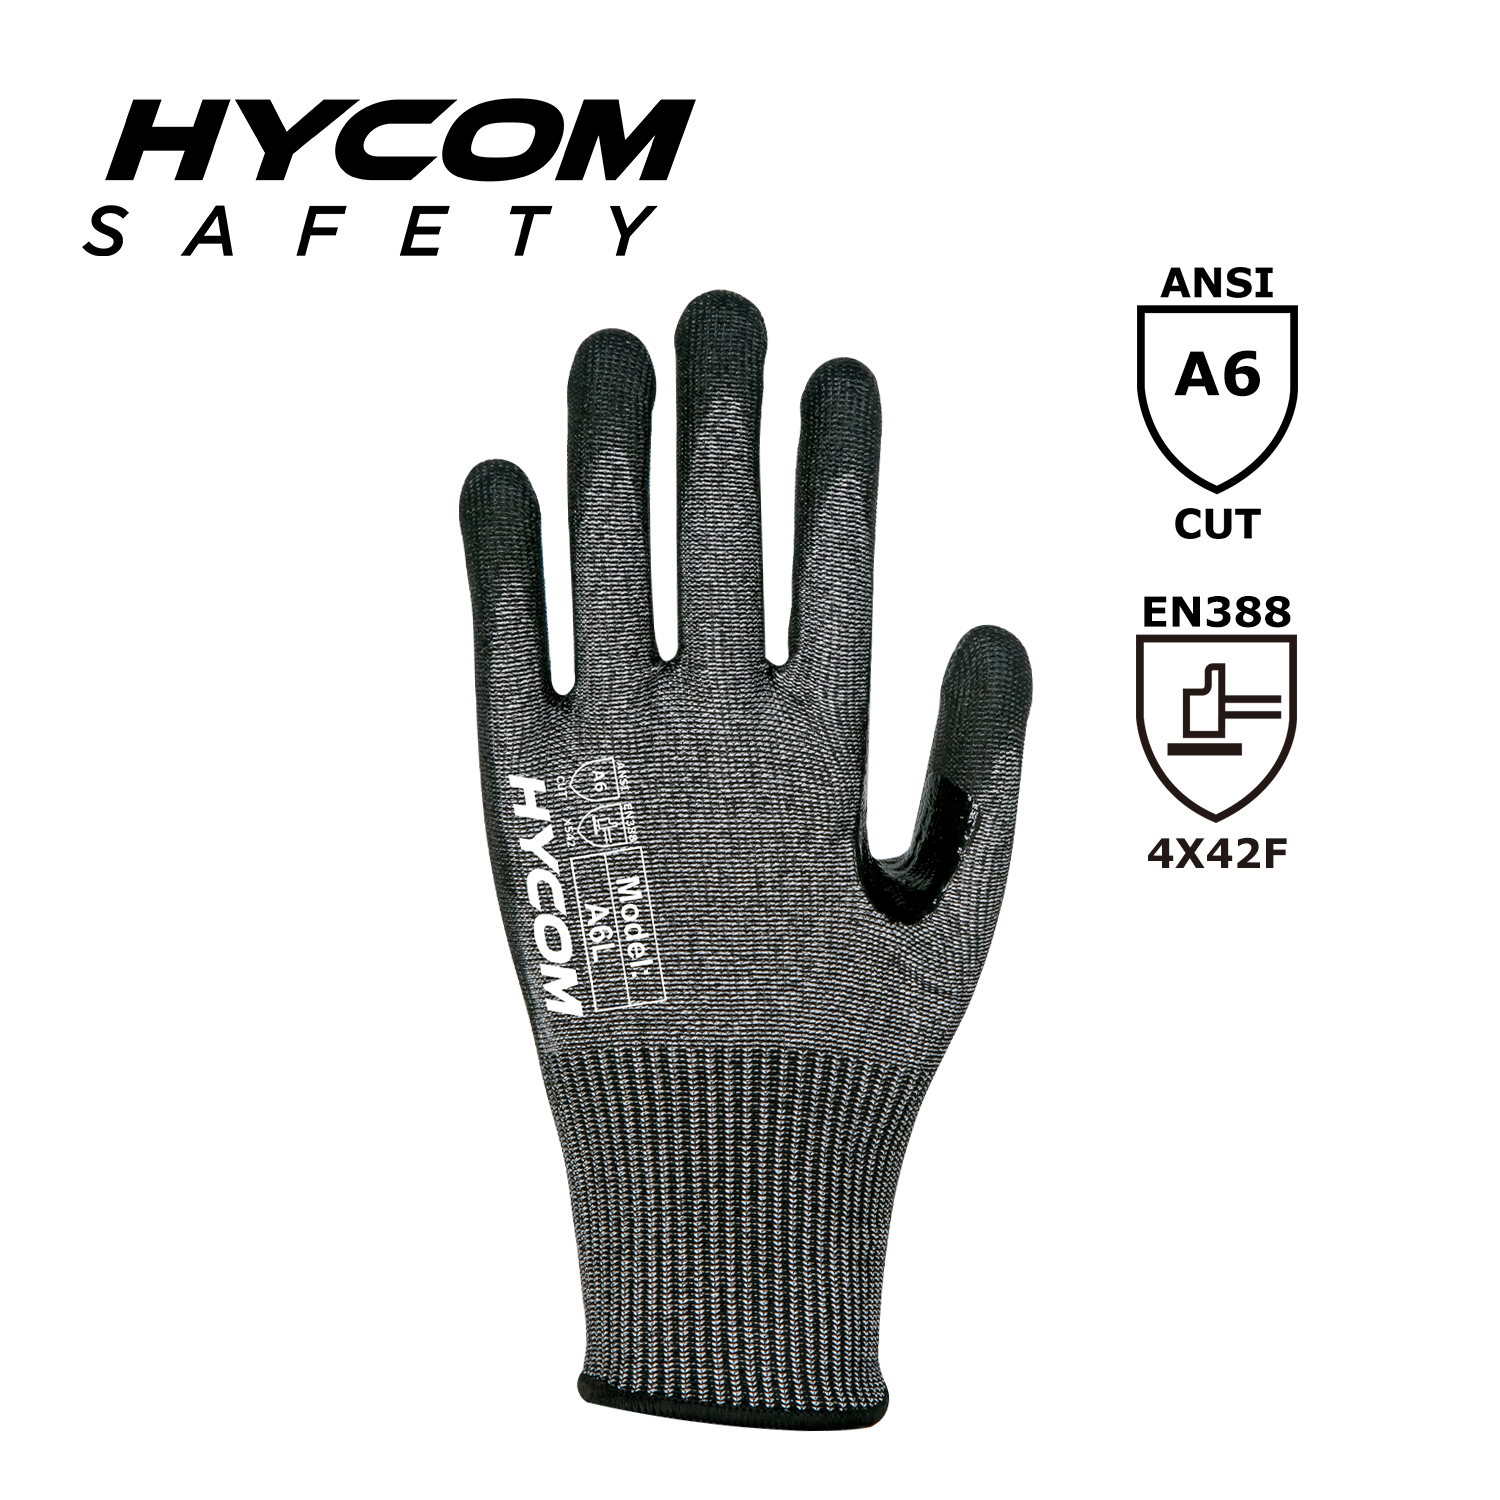 HYCOM 13G ANSI 6 Cut Resistant Glove with Palm Nitrile Coating PPE gloves